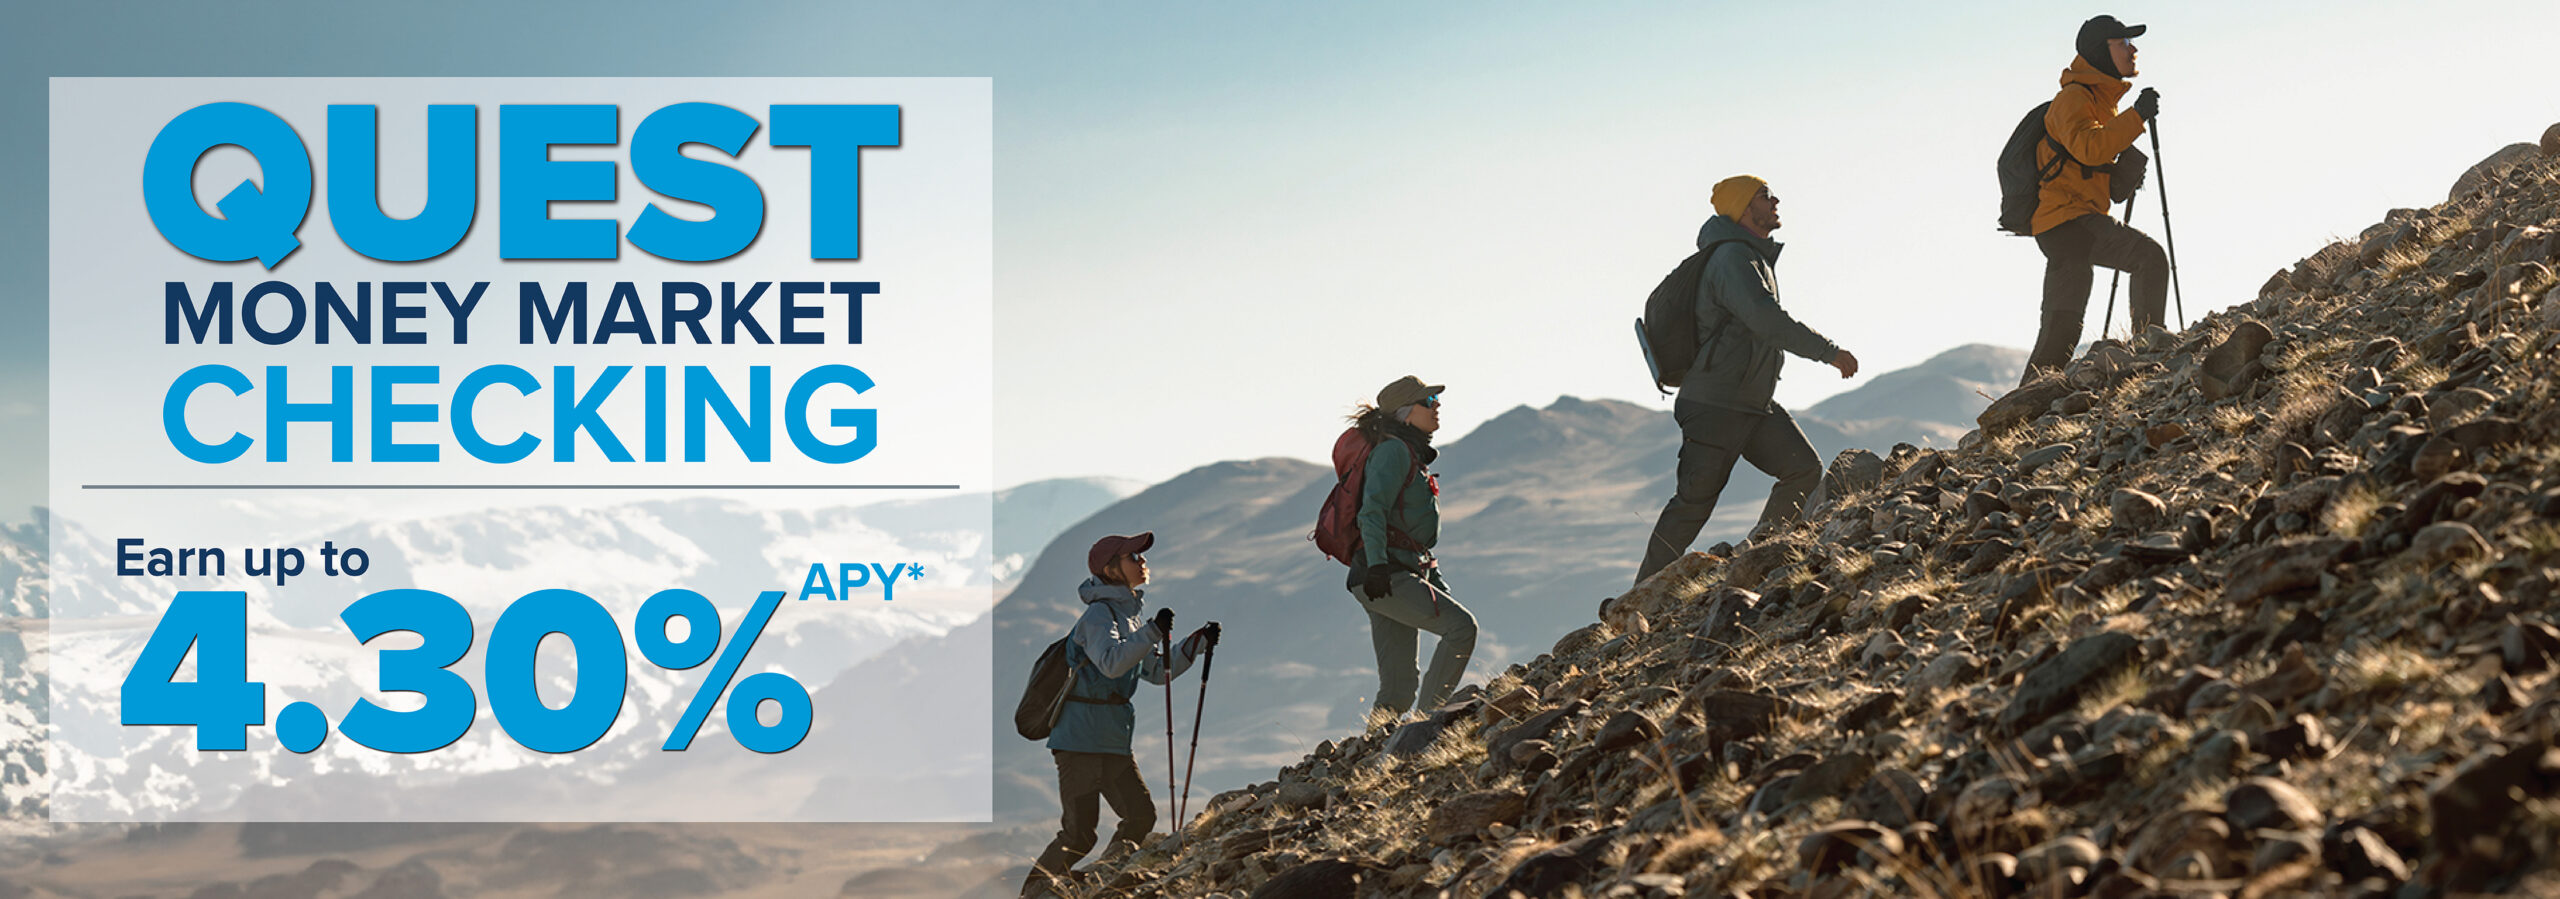 Hikers trekking up a rocky mountain terrain. Quest Money Market earn up to 4.30% APY*